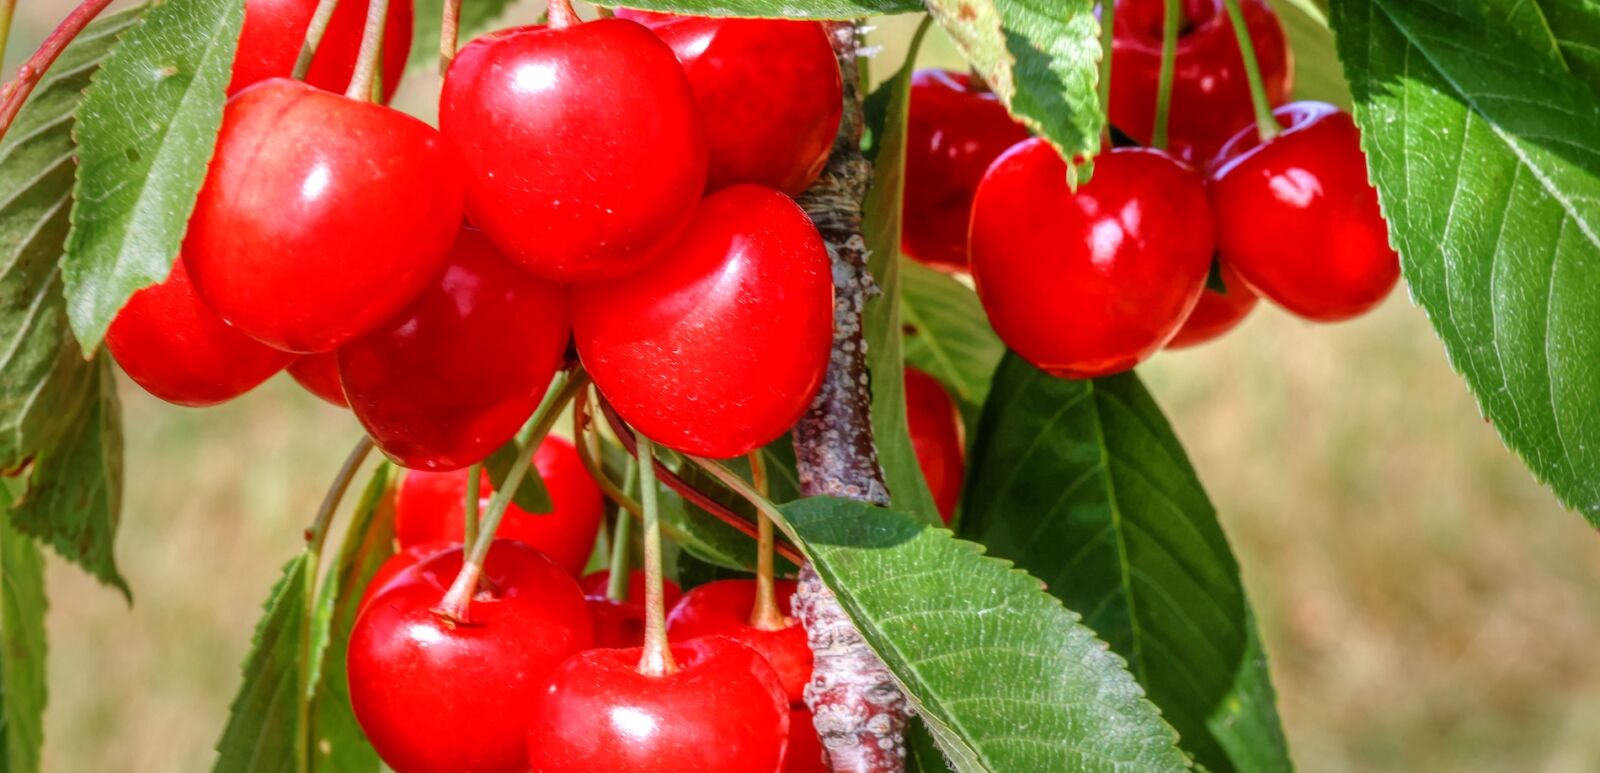 Traverse City Cherries, Home of the National Cherry Festival